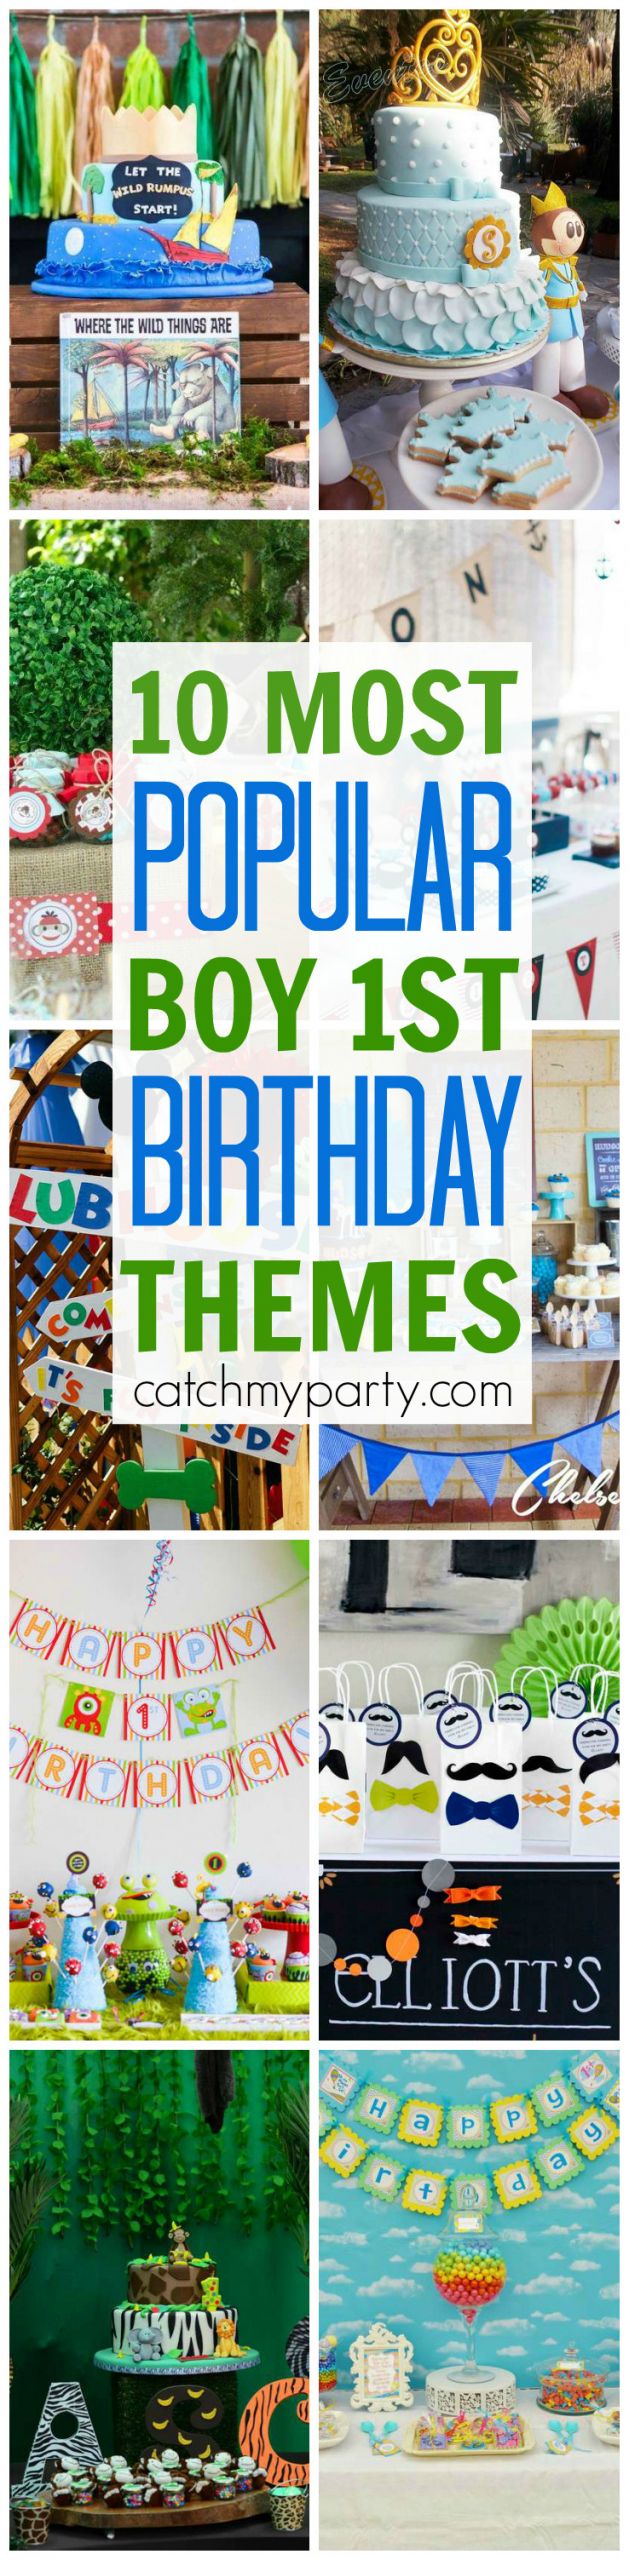 First Birthday Party Ideas For Boys
 10 Most Popular Boy 1st Birthday Party Themes